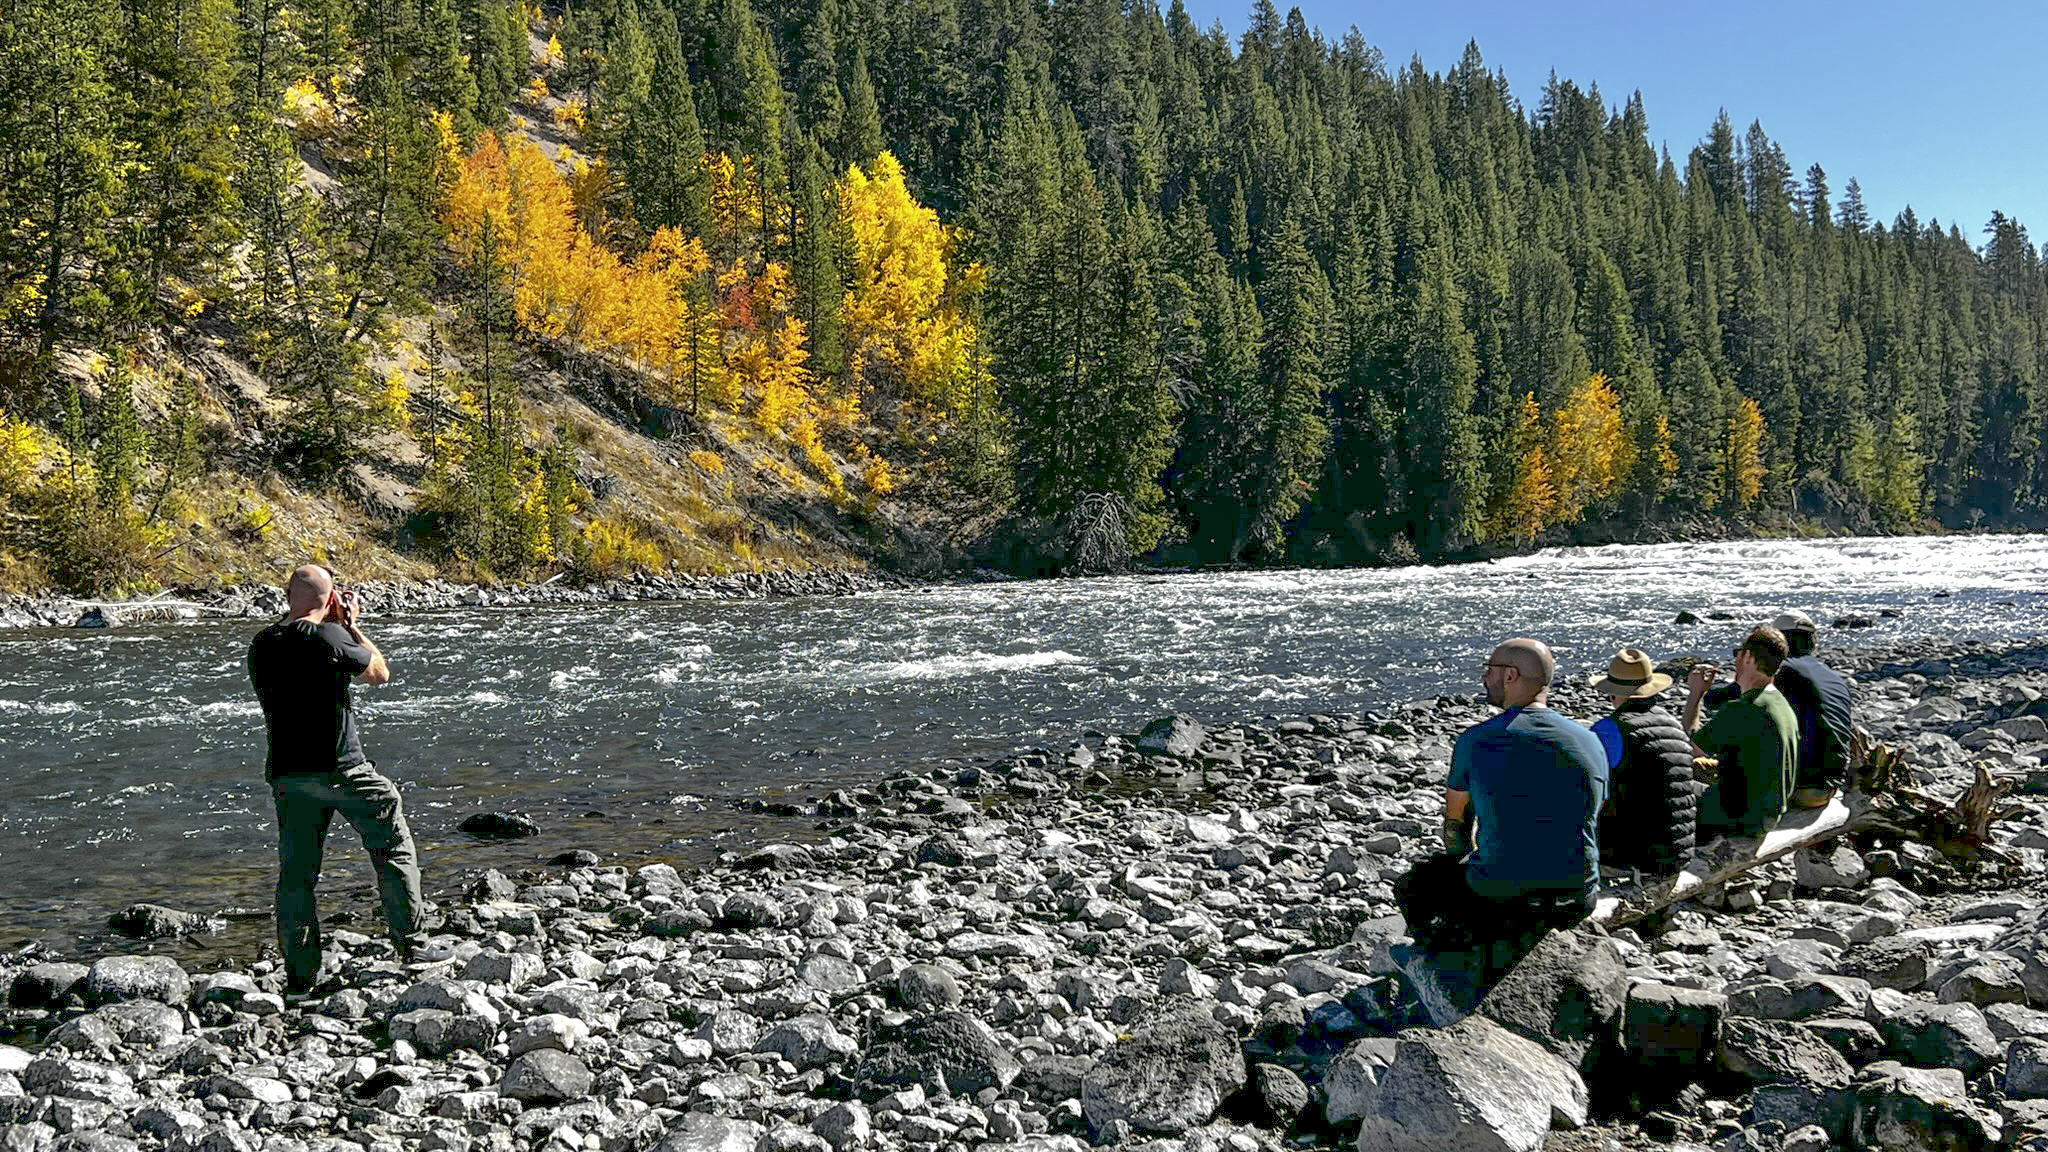 Photographer and group enjoying fall views of the Yellowstone River